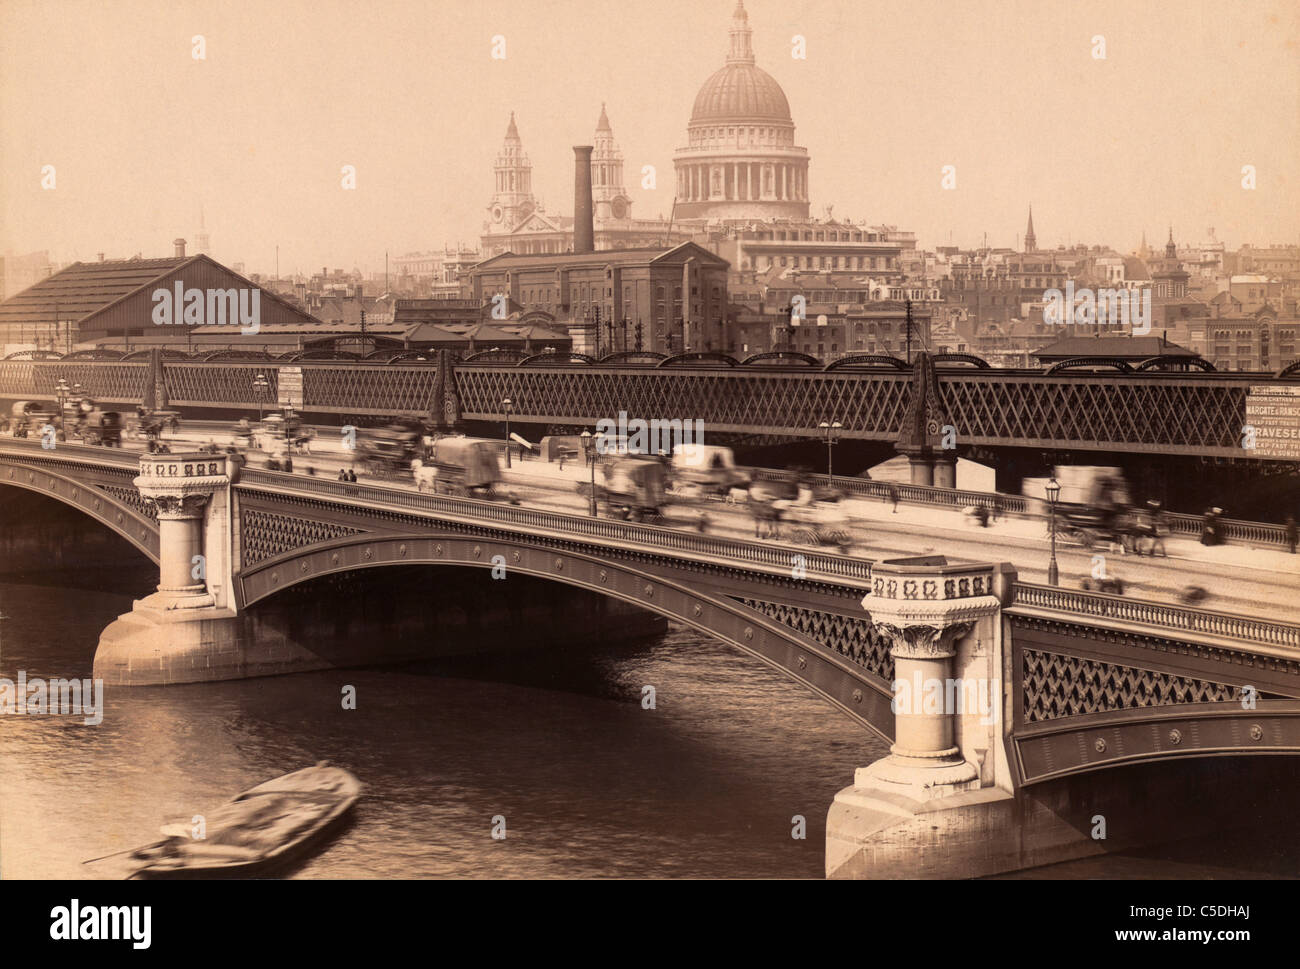 London, England. Blackfriar's Bridge with St. Paul's cathedral behind. Stock Photo